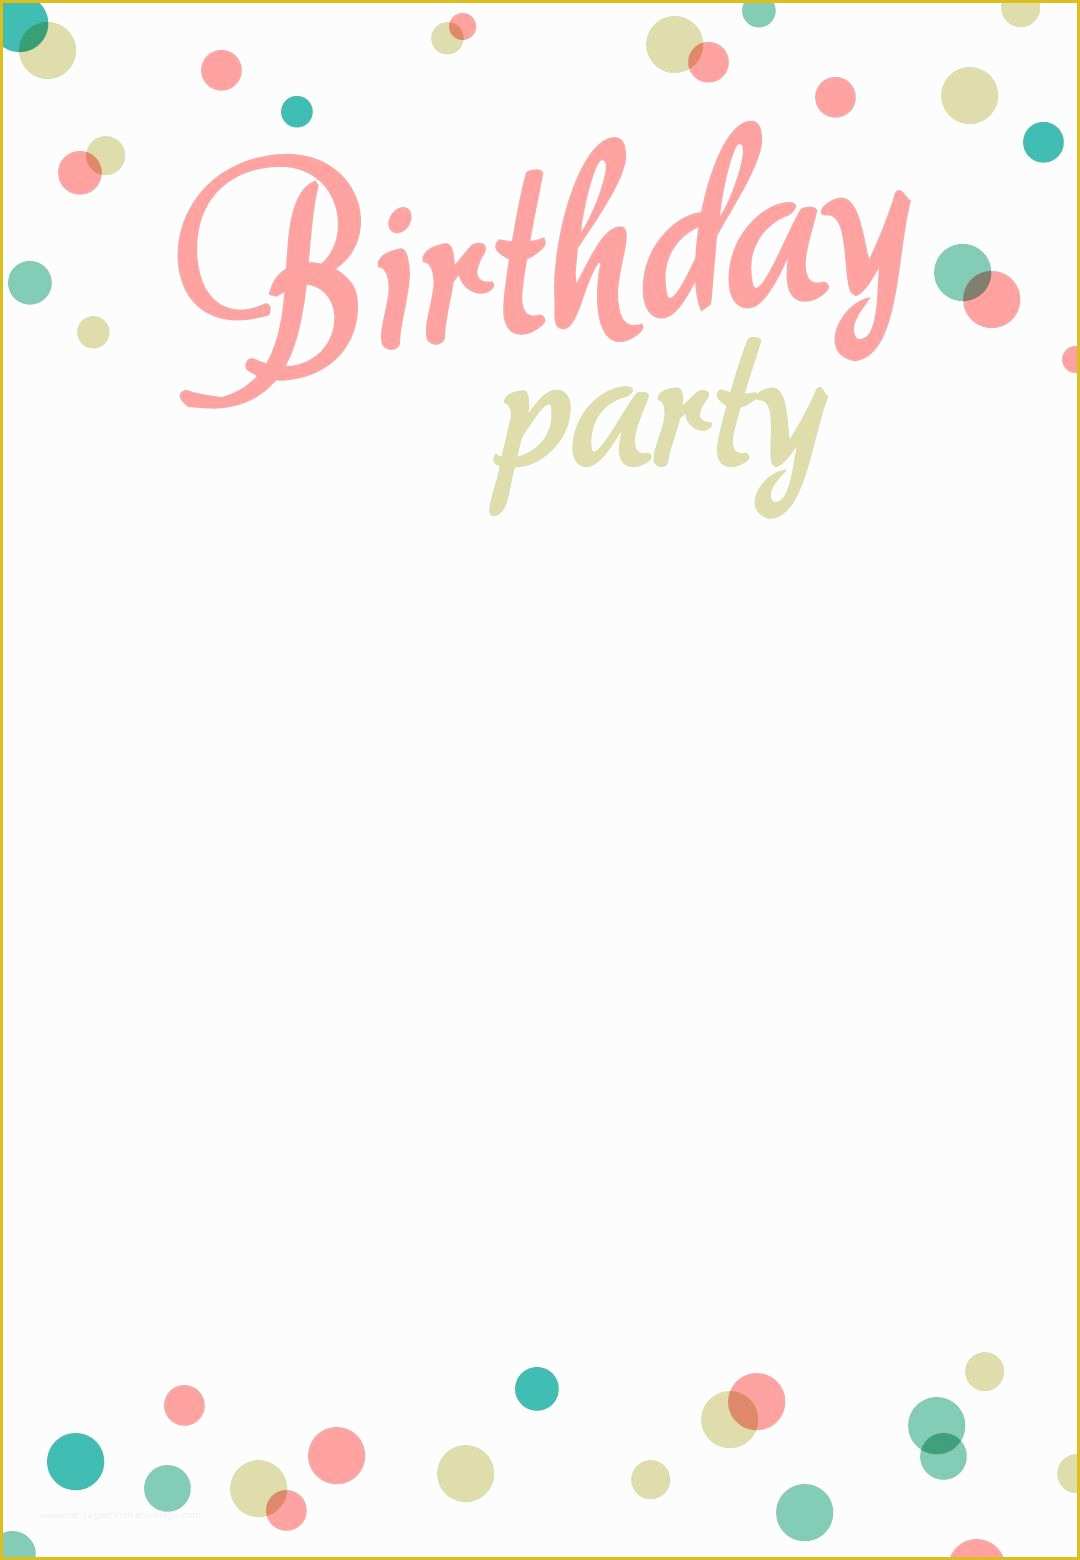 Free Childrens Party Invites Templates Of Birthday Party Invitation Free Printable